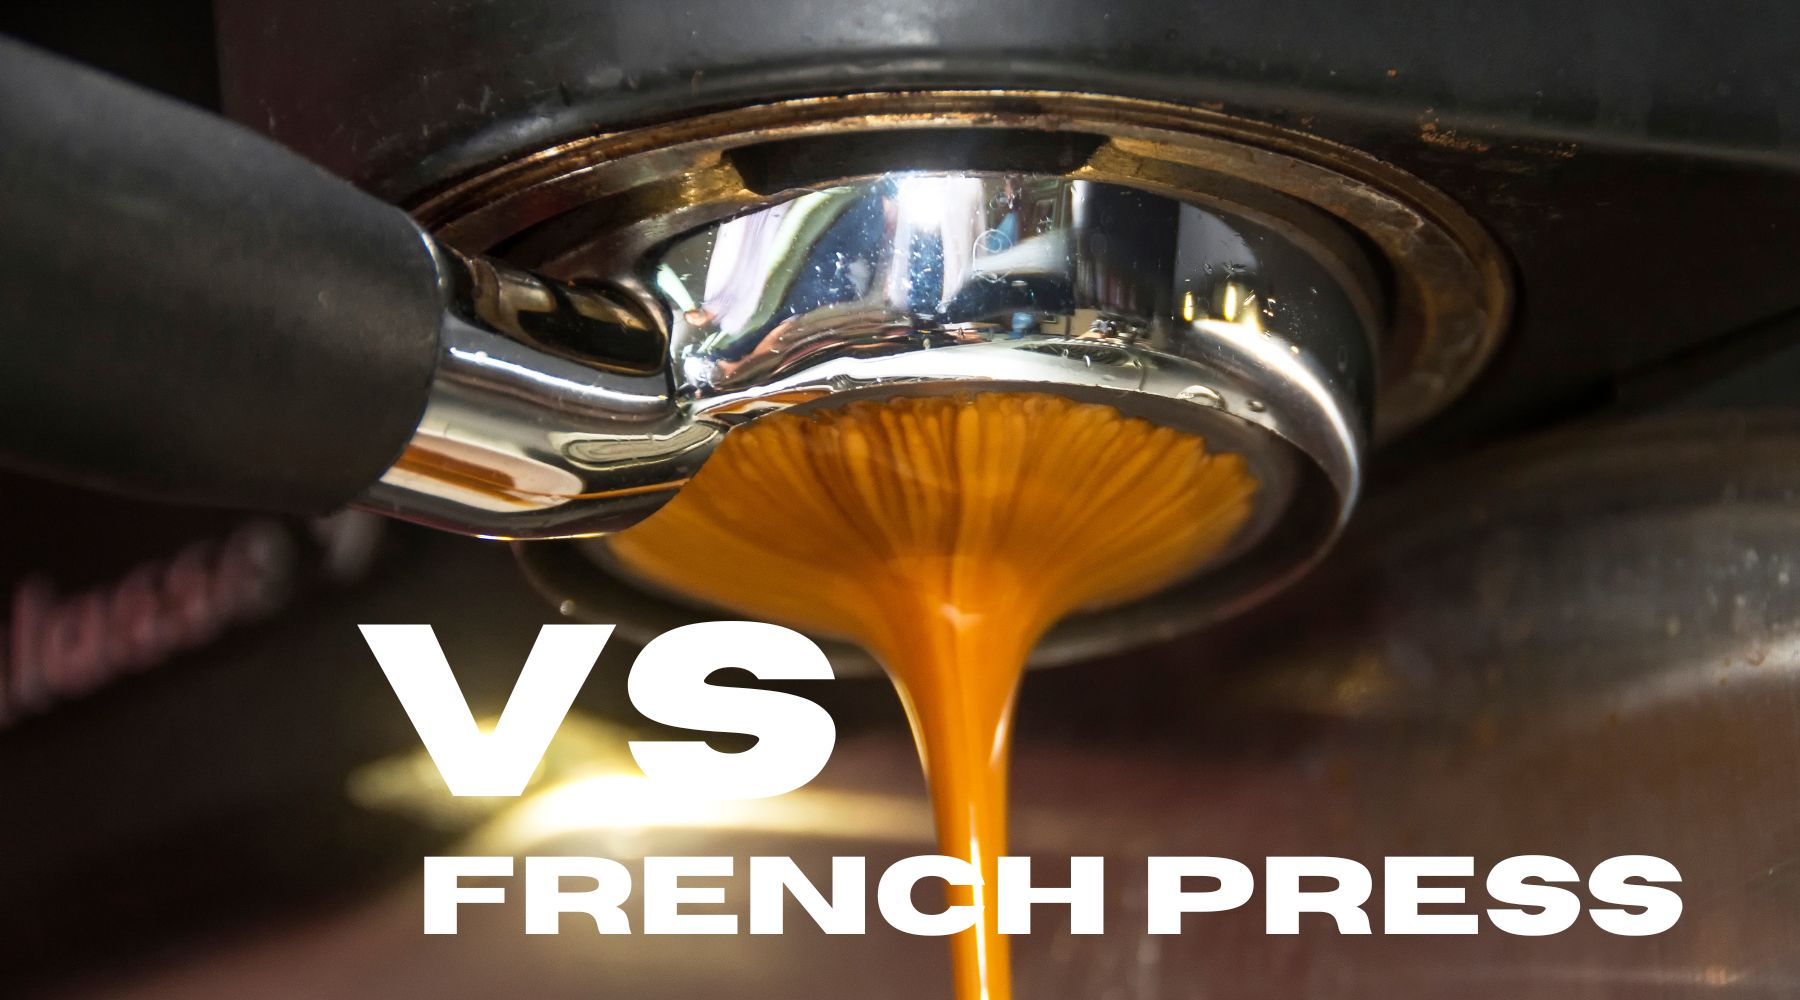 Make Espresso Using a French Press - It's Easier Than You Think